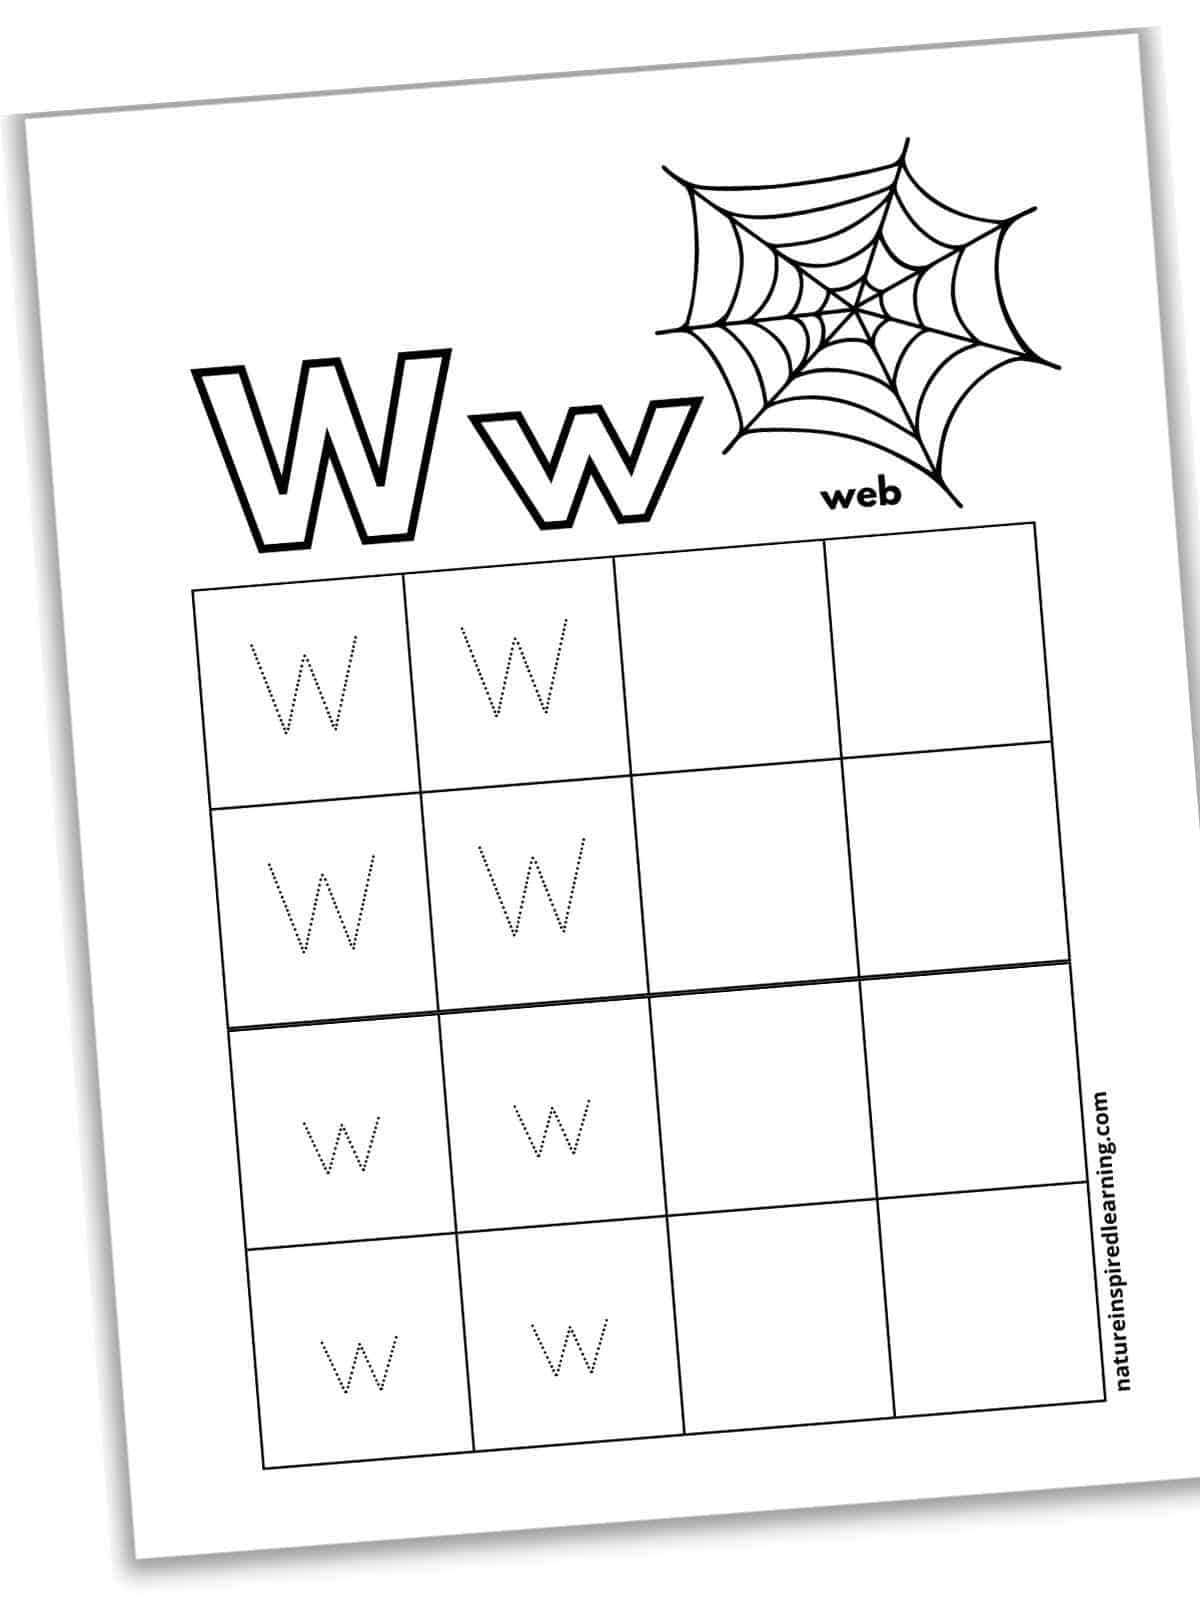 worksheet with large square grid with dotted W's, w's, and blank boxes below a spider web and outlines of W and w